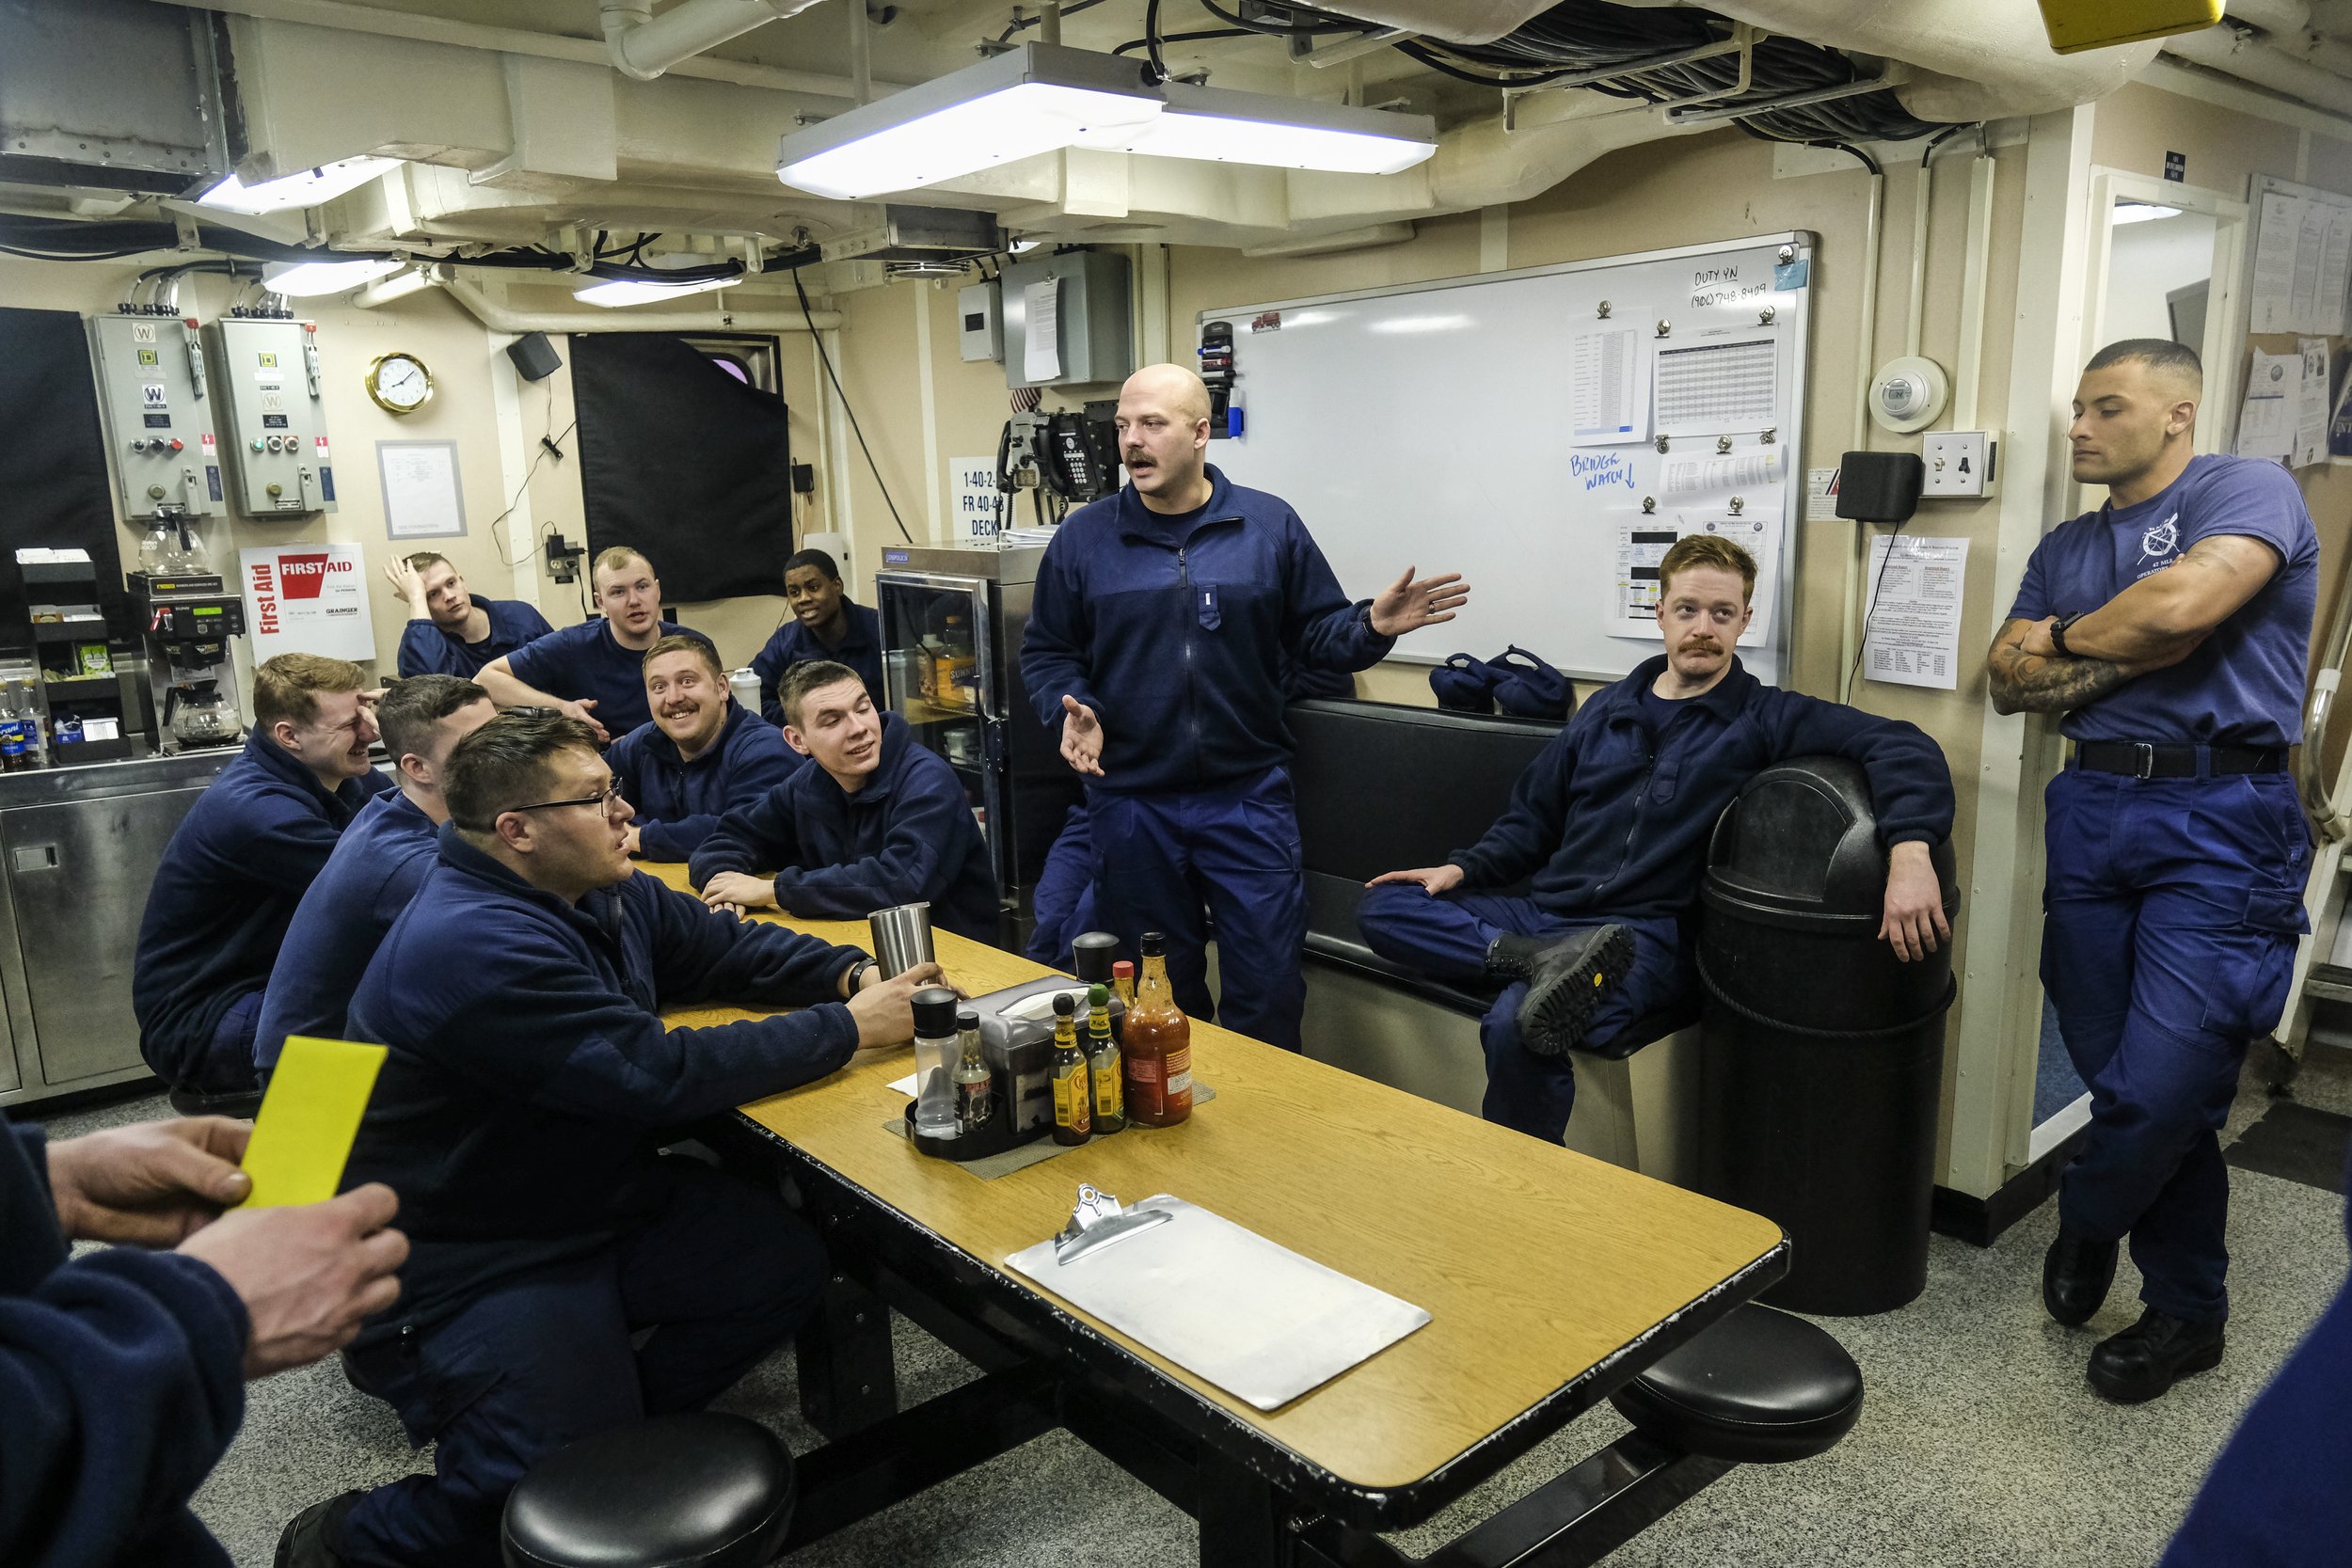  Executive Officer Bryant Giorgi speaks to crew members of the United States Coast Guard Cutter Katmai Bay following a day of operations cutting ice in the St. Mary's River on Tuesday, March 14, 2023. The Katmai Bay is one of the ships in the US Coas